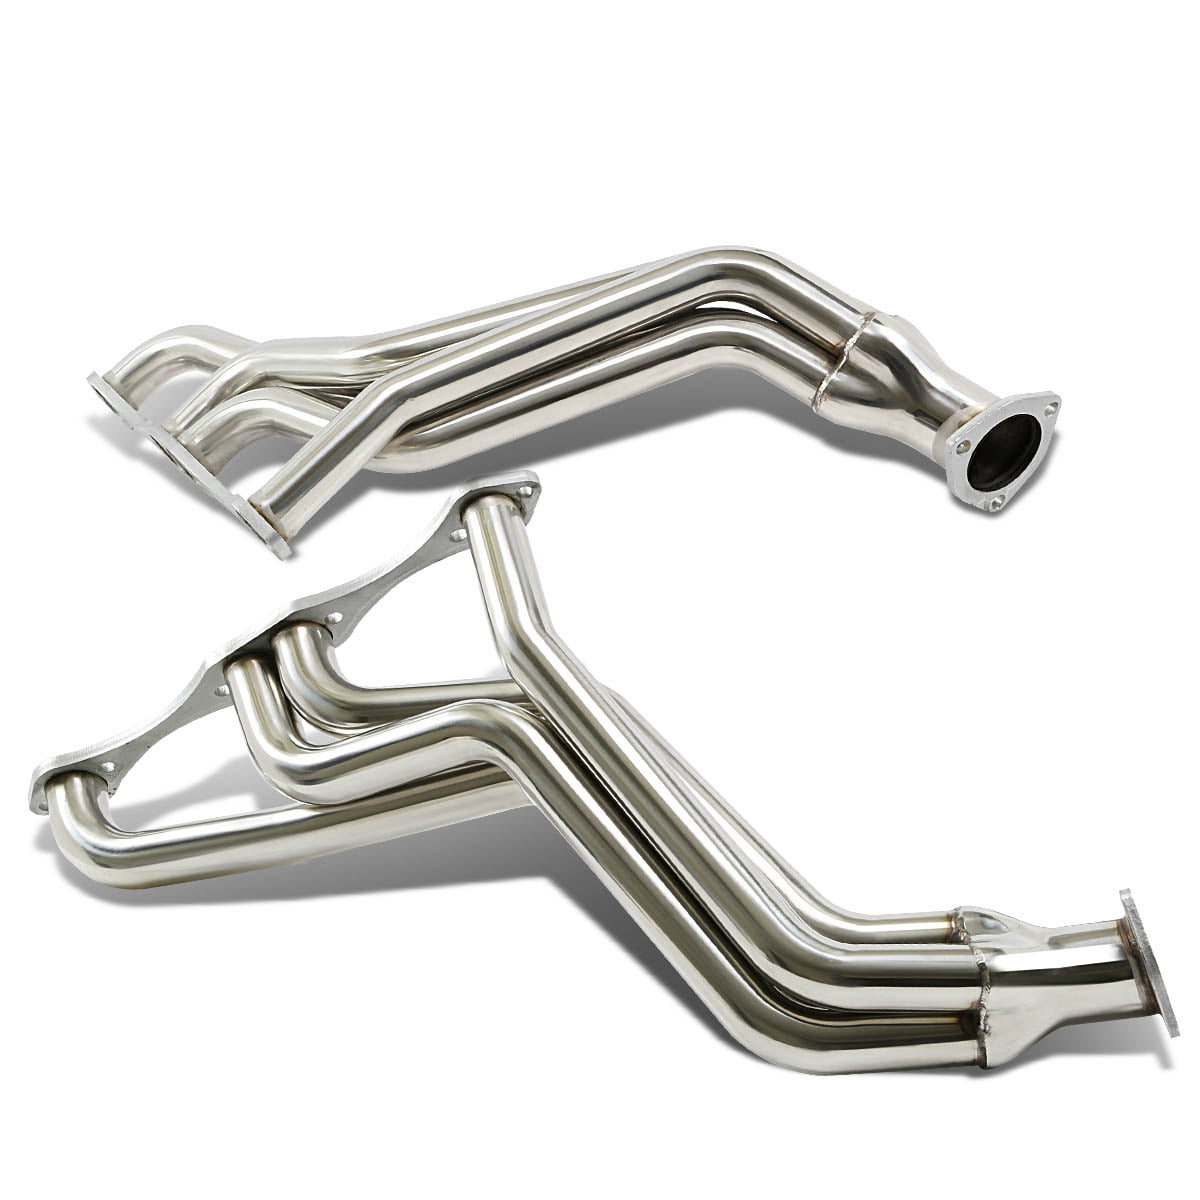 Chevy Small Block 2x4 -1 Design Stainless Steel Exhaust Header Kit Stainless Steel Headers Small Block Chevy